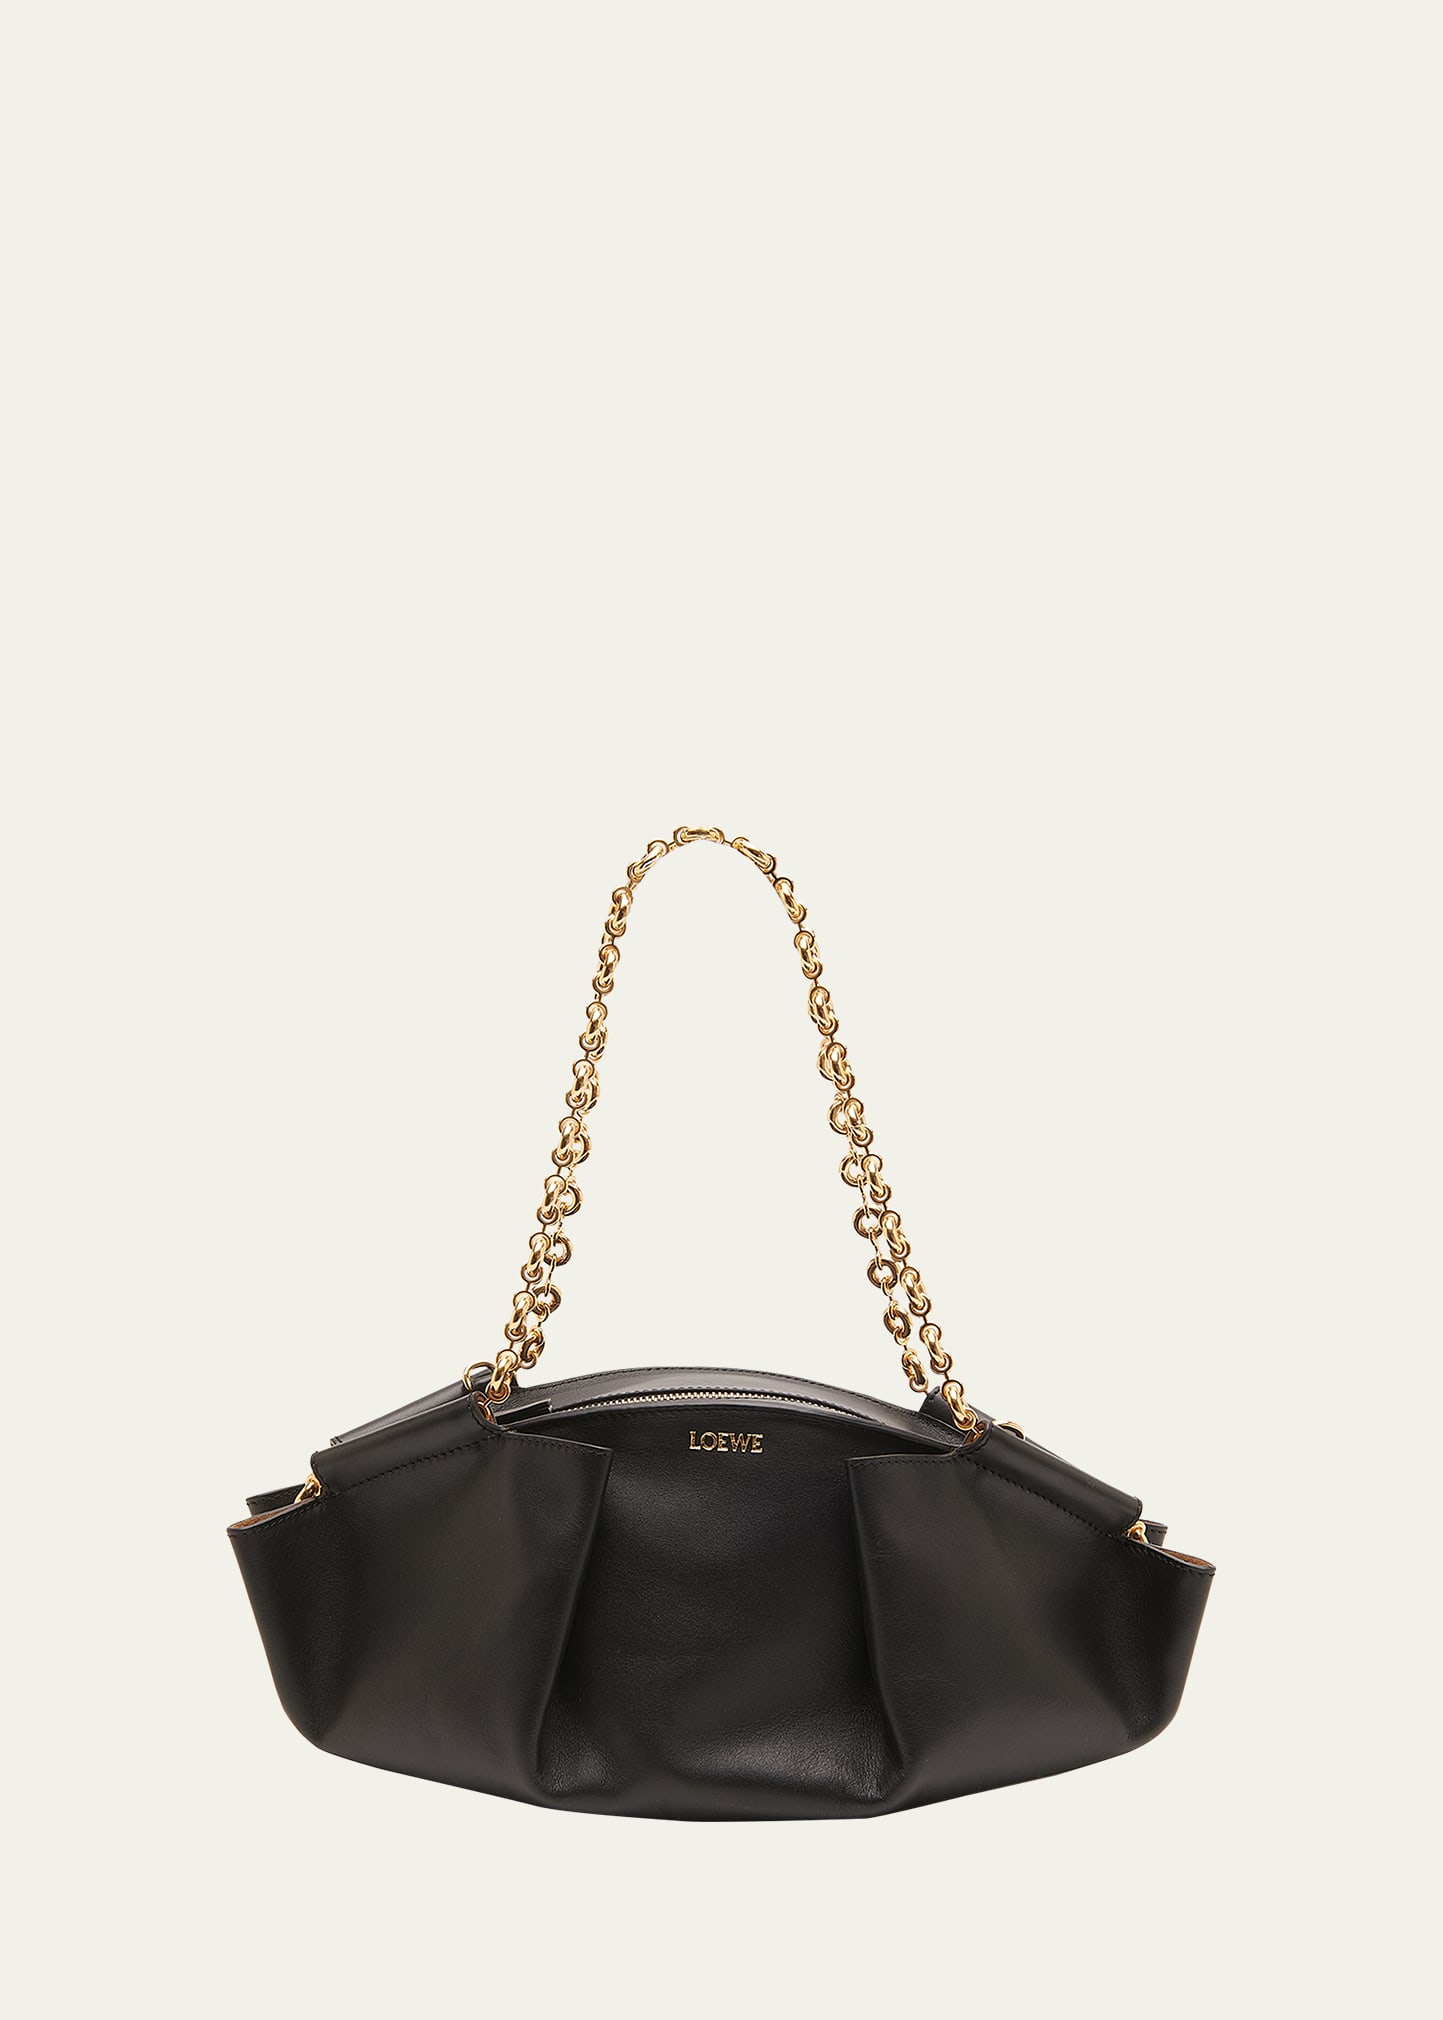 Loewe Paseo Small Leather Chain Shoulder Bag In Black